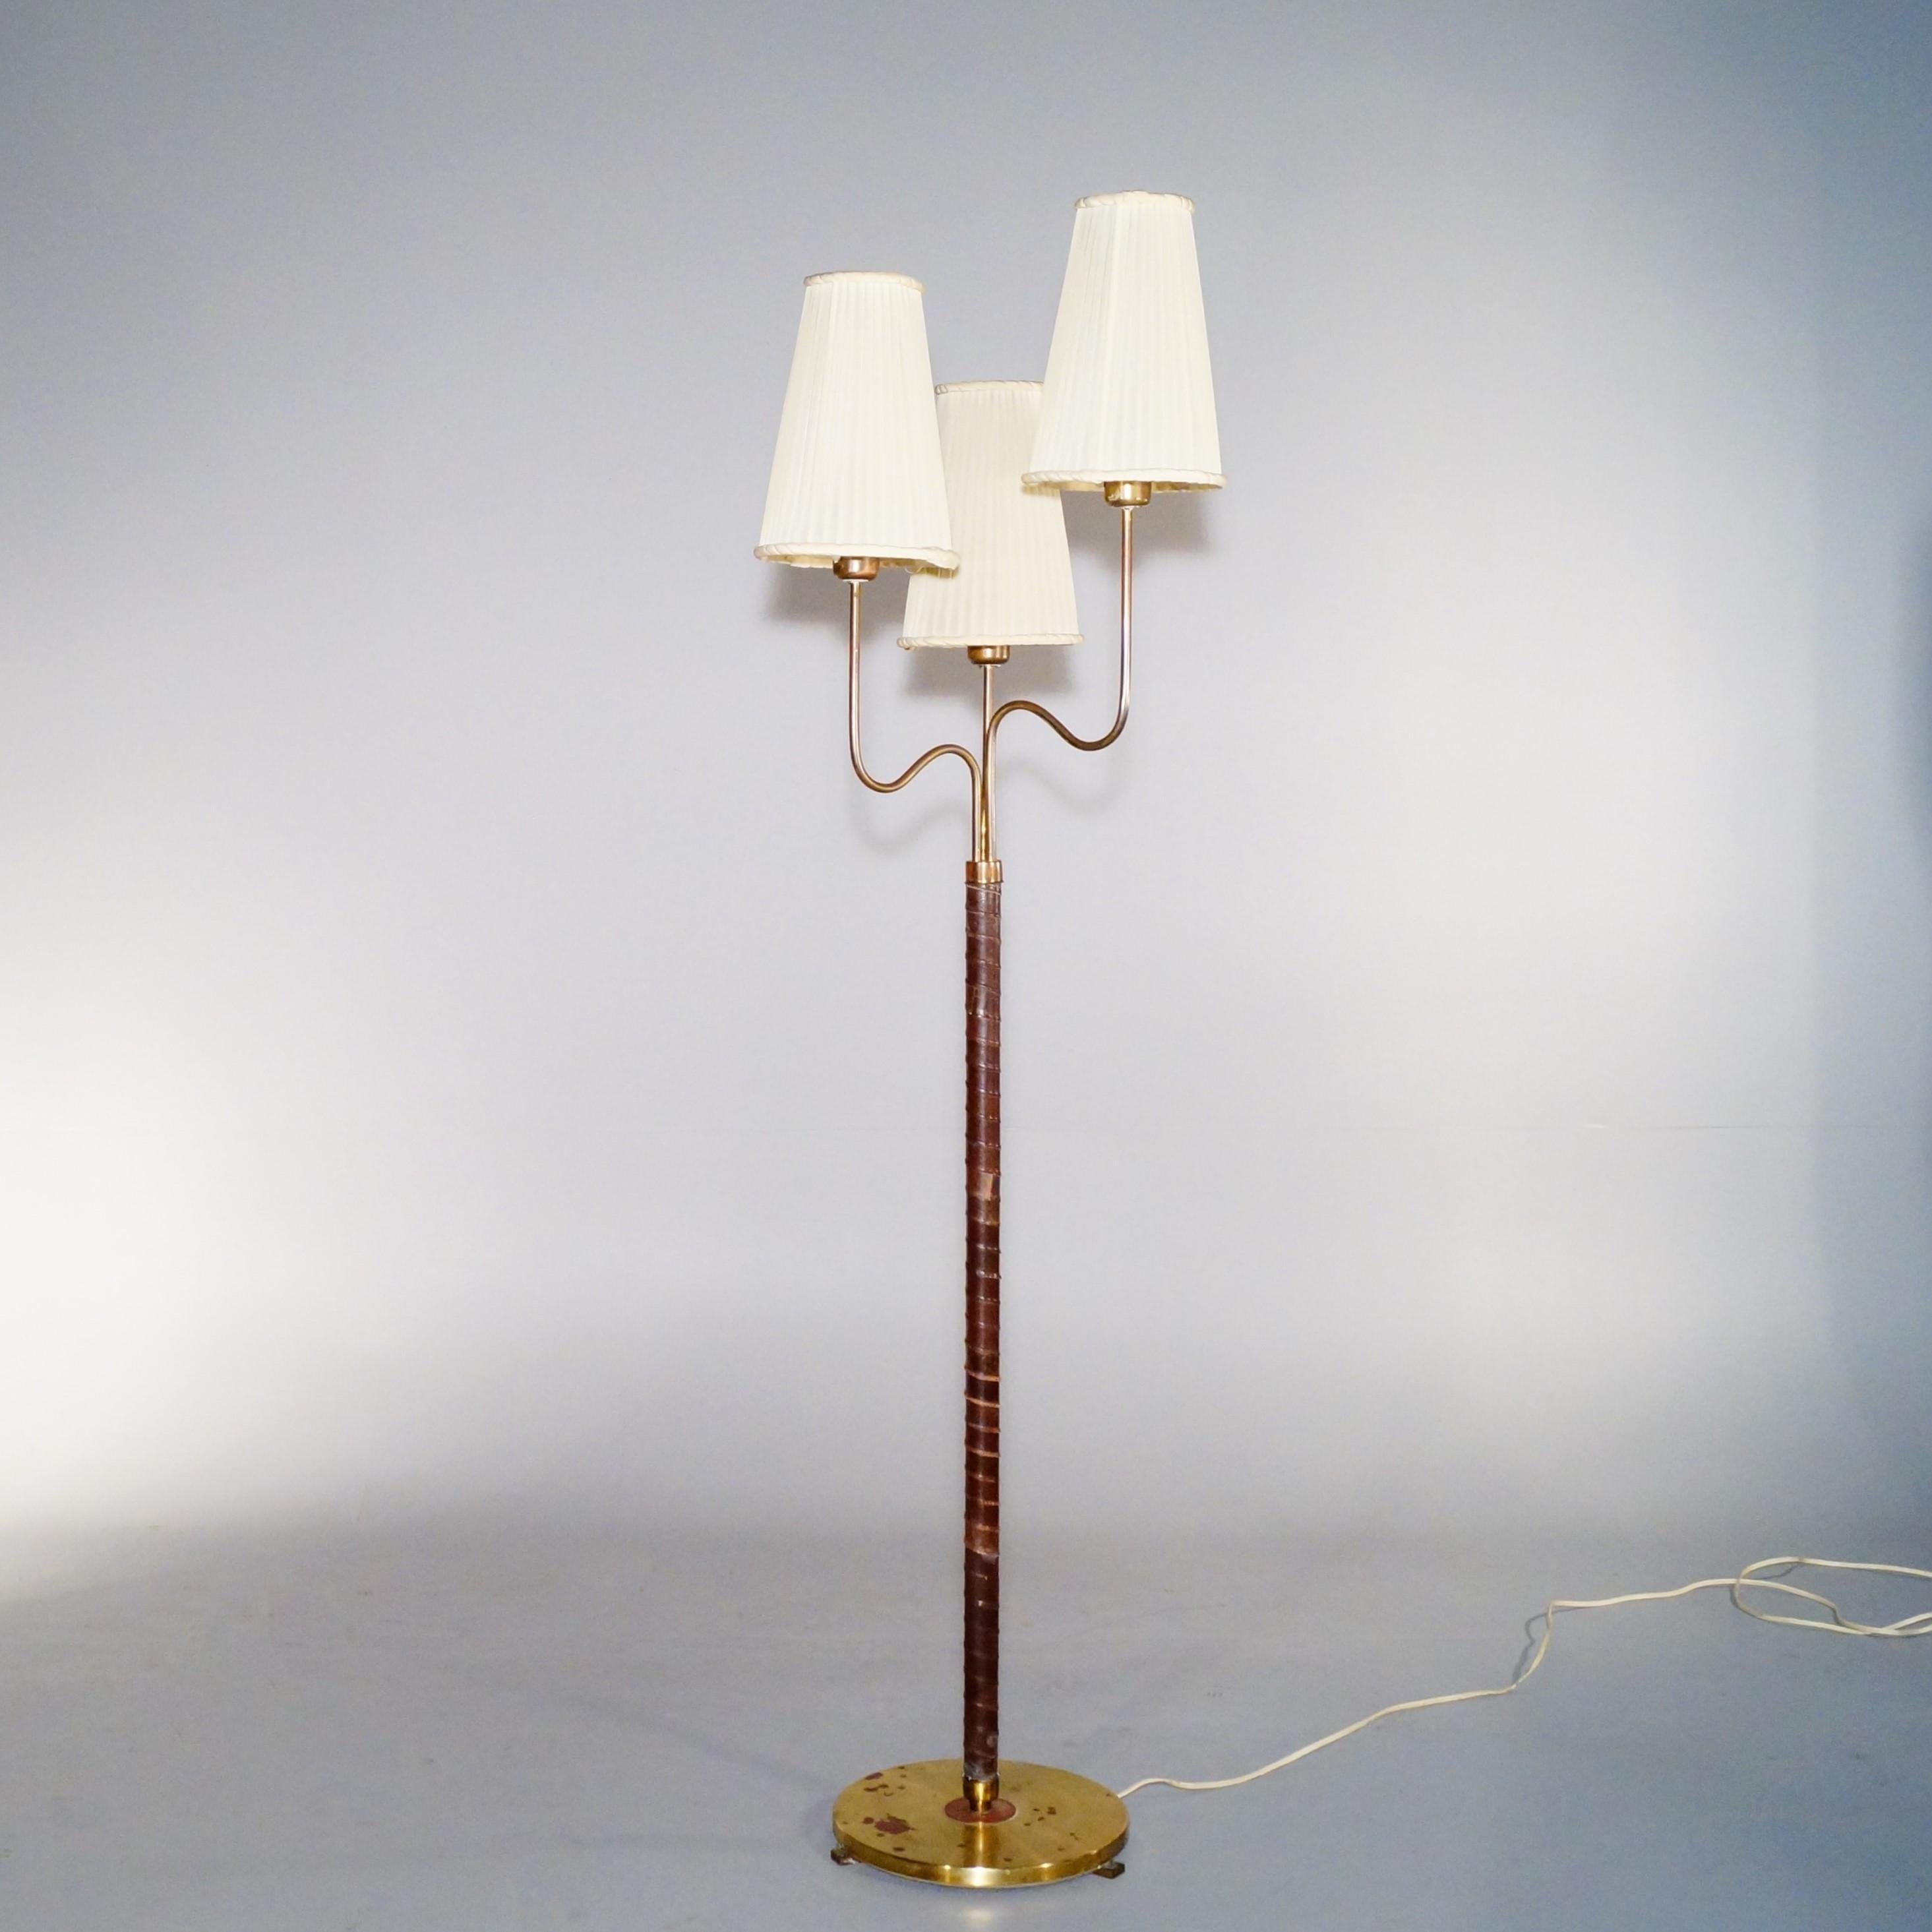 Rare floor lamp with 3 organic arms and lampshades fitted each with E27 sockets, designed by Hans Bergström & Produced by ASEA in 1946. Dimensions are of Floor Lamp with Lampshades. Original condition never restored, should be rewired. 